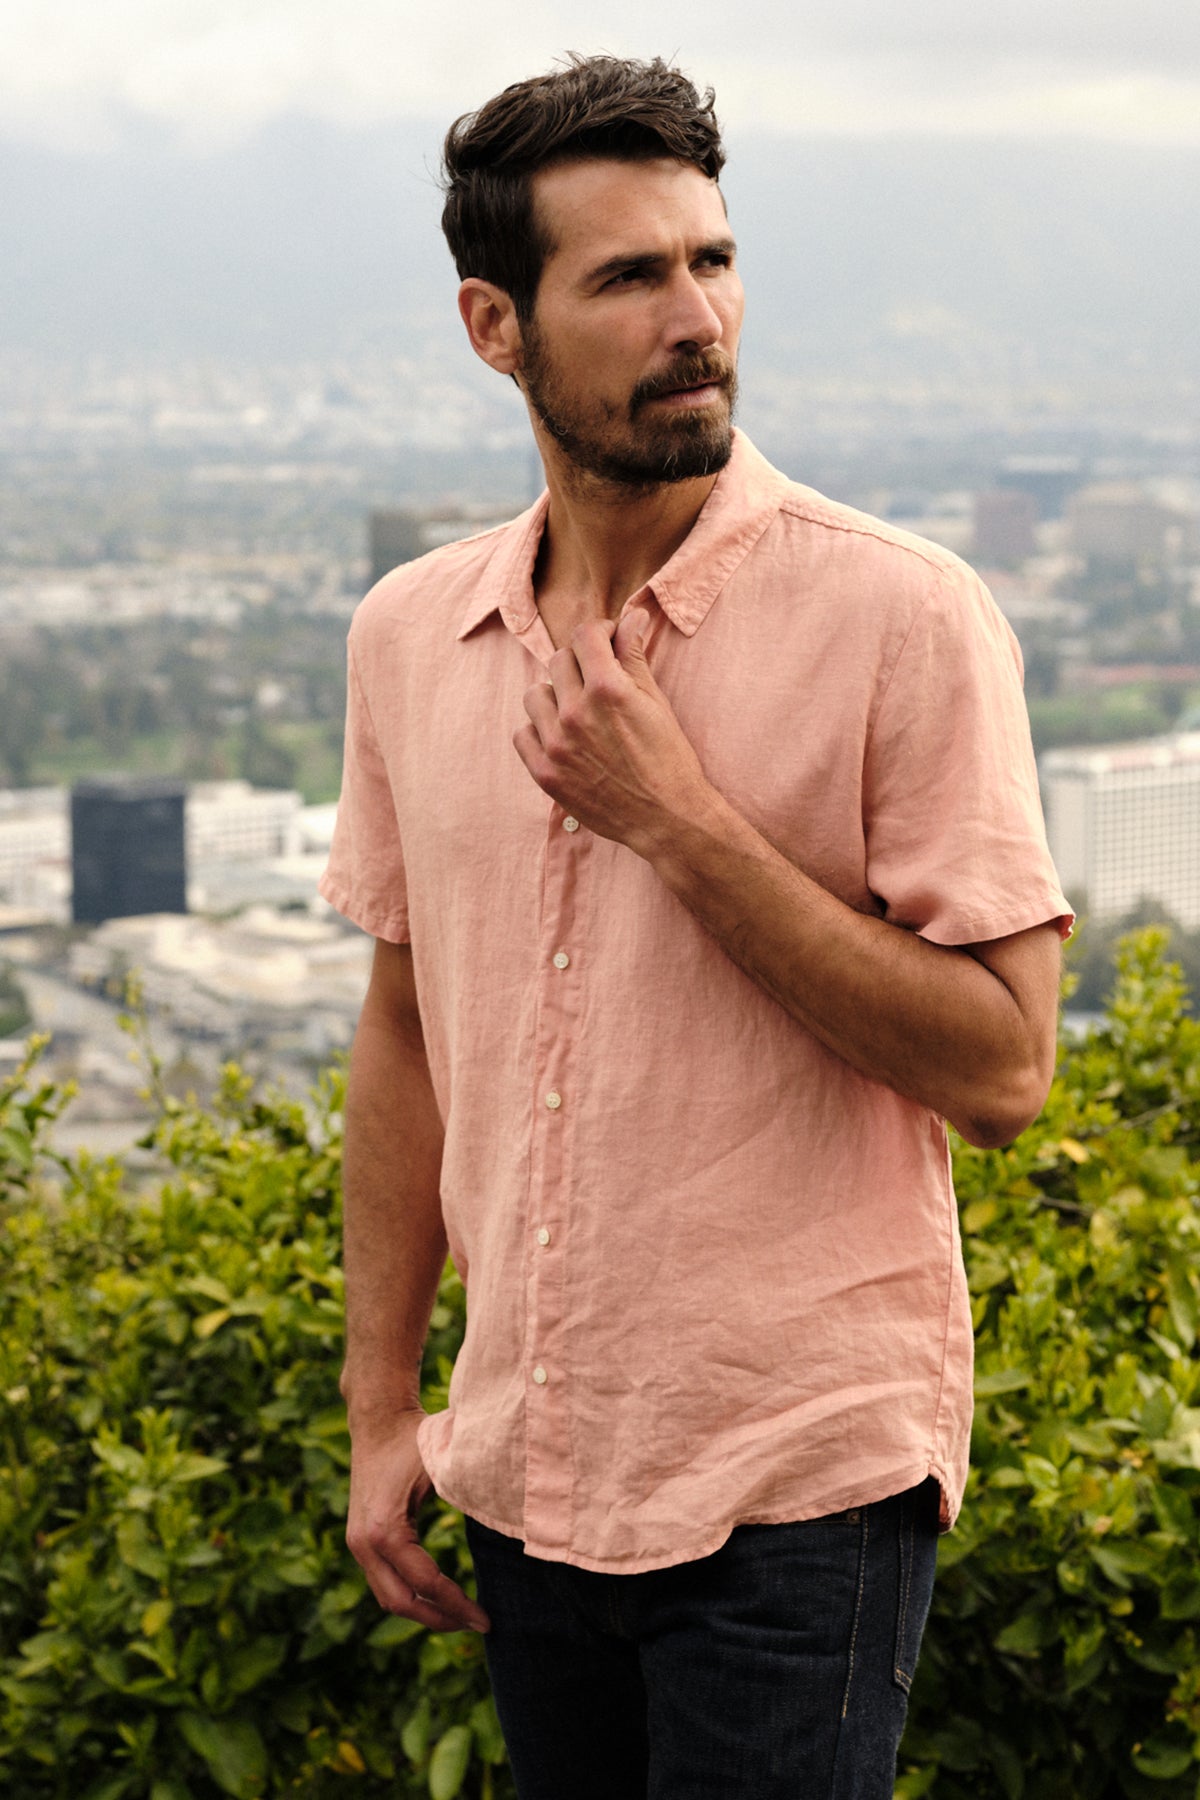   Mackie Button-Up Shirt in bronze with dark denim, model standing outdoors near greenery overlooking downtown 